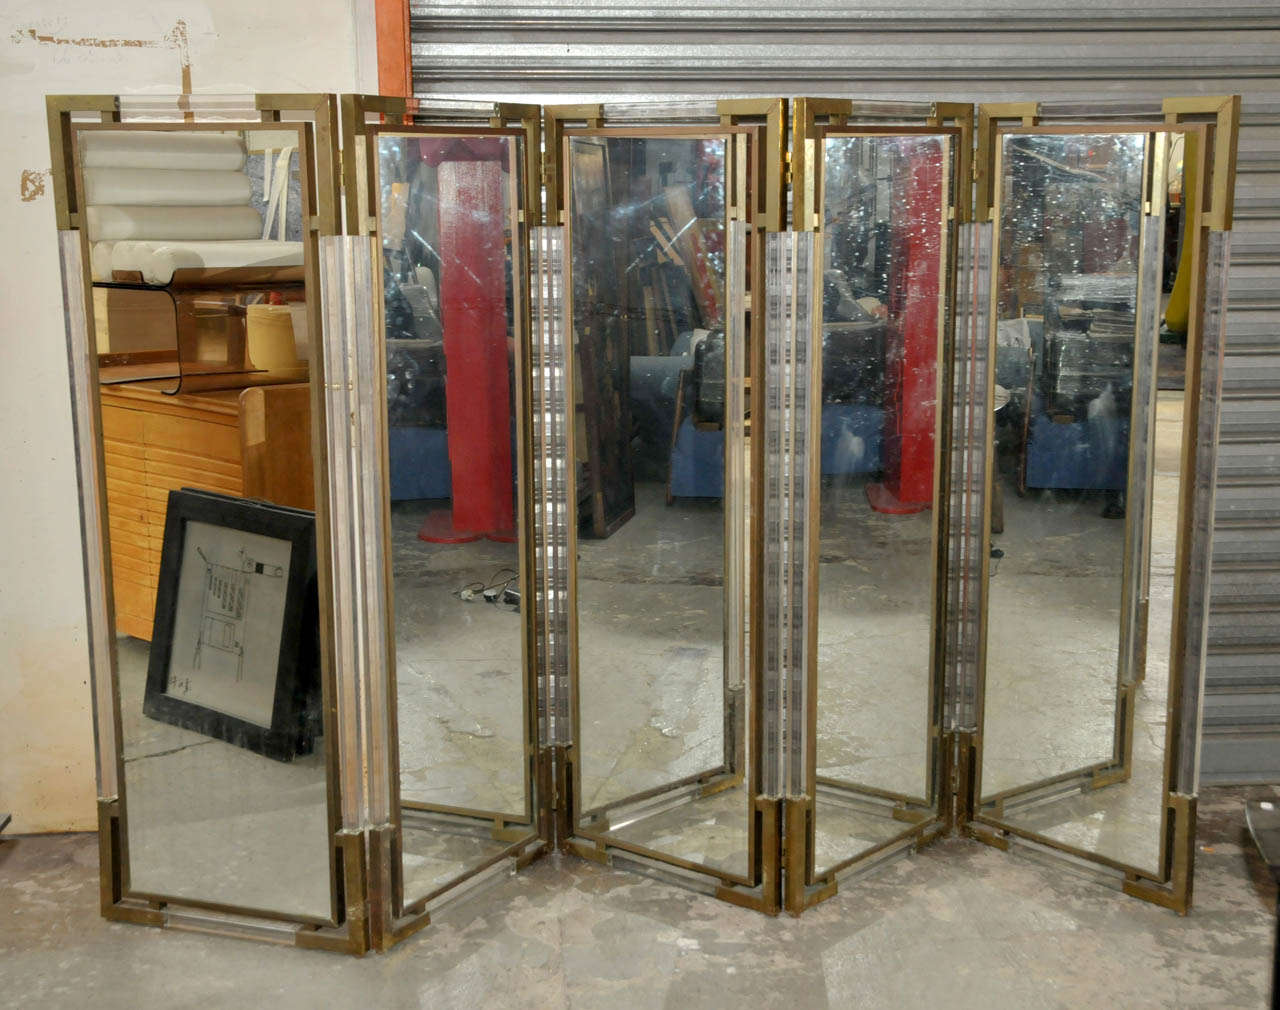 20th Century five panels screen in plexiglass, mirror, brass and lacquer. Mirror on one size and lacquer on the other side. One splint on the lacquer (may be restored). Good condition. Normal wear consistent with age and use. 

Dimension: width